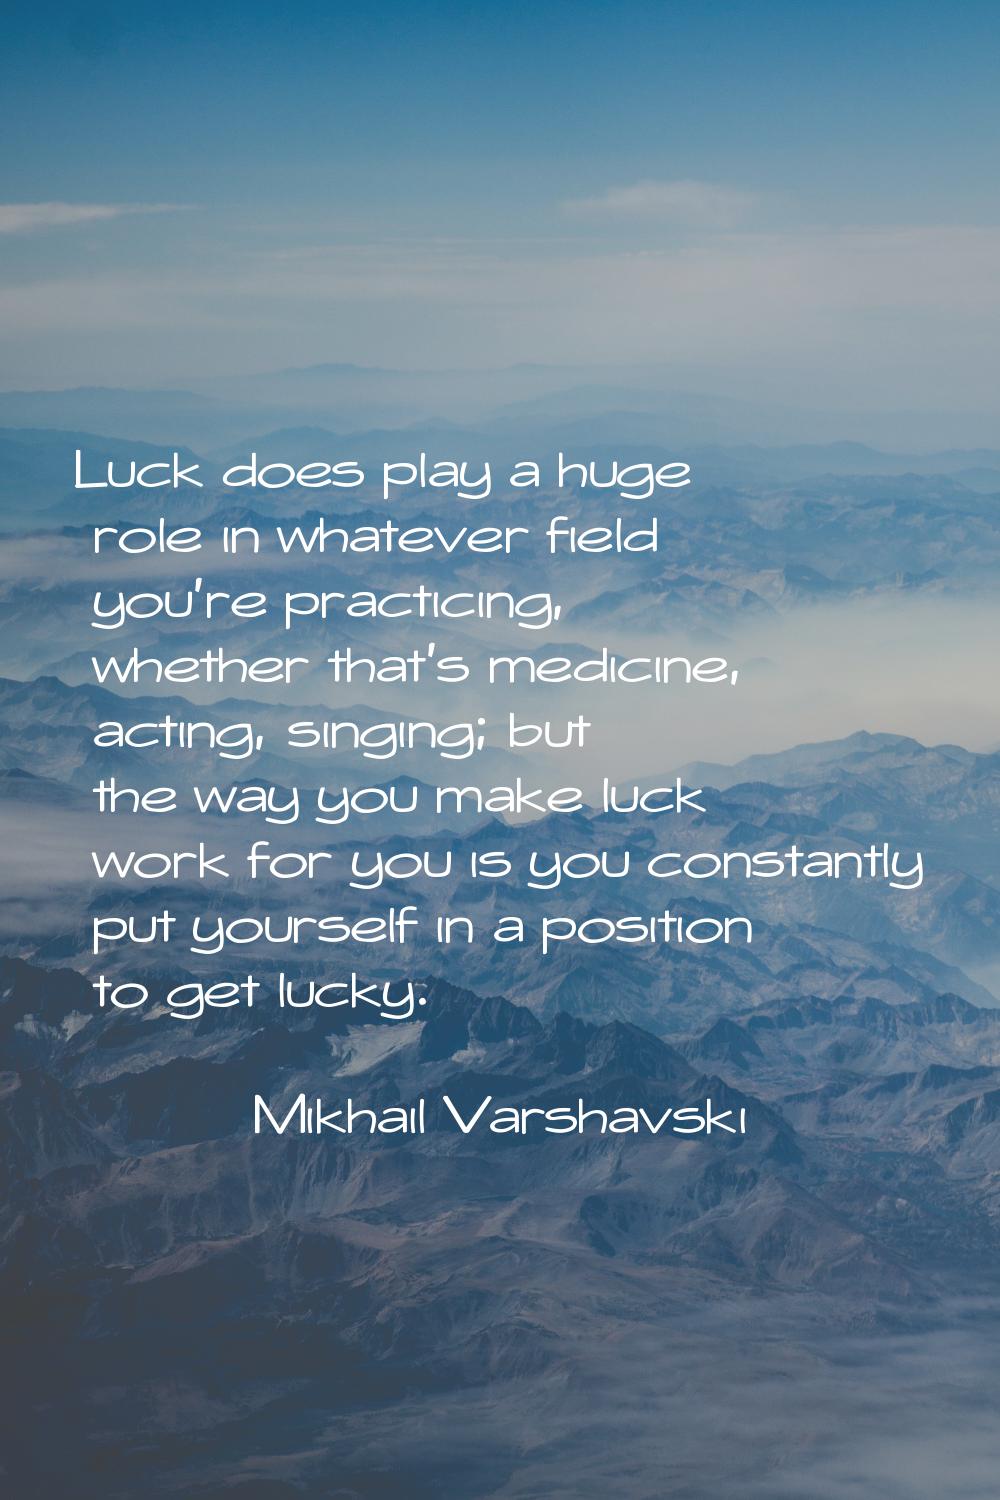 Luck does play a huge role in whatever field you're practicing, whether that's medicine, acting, si